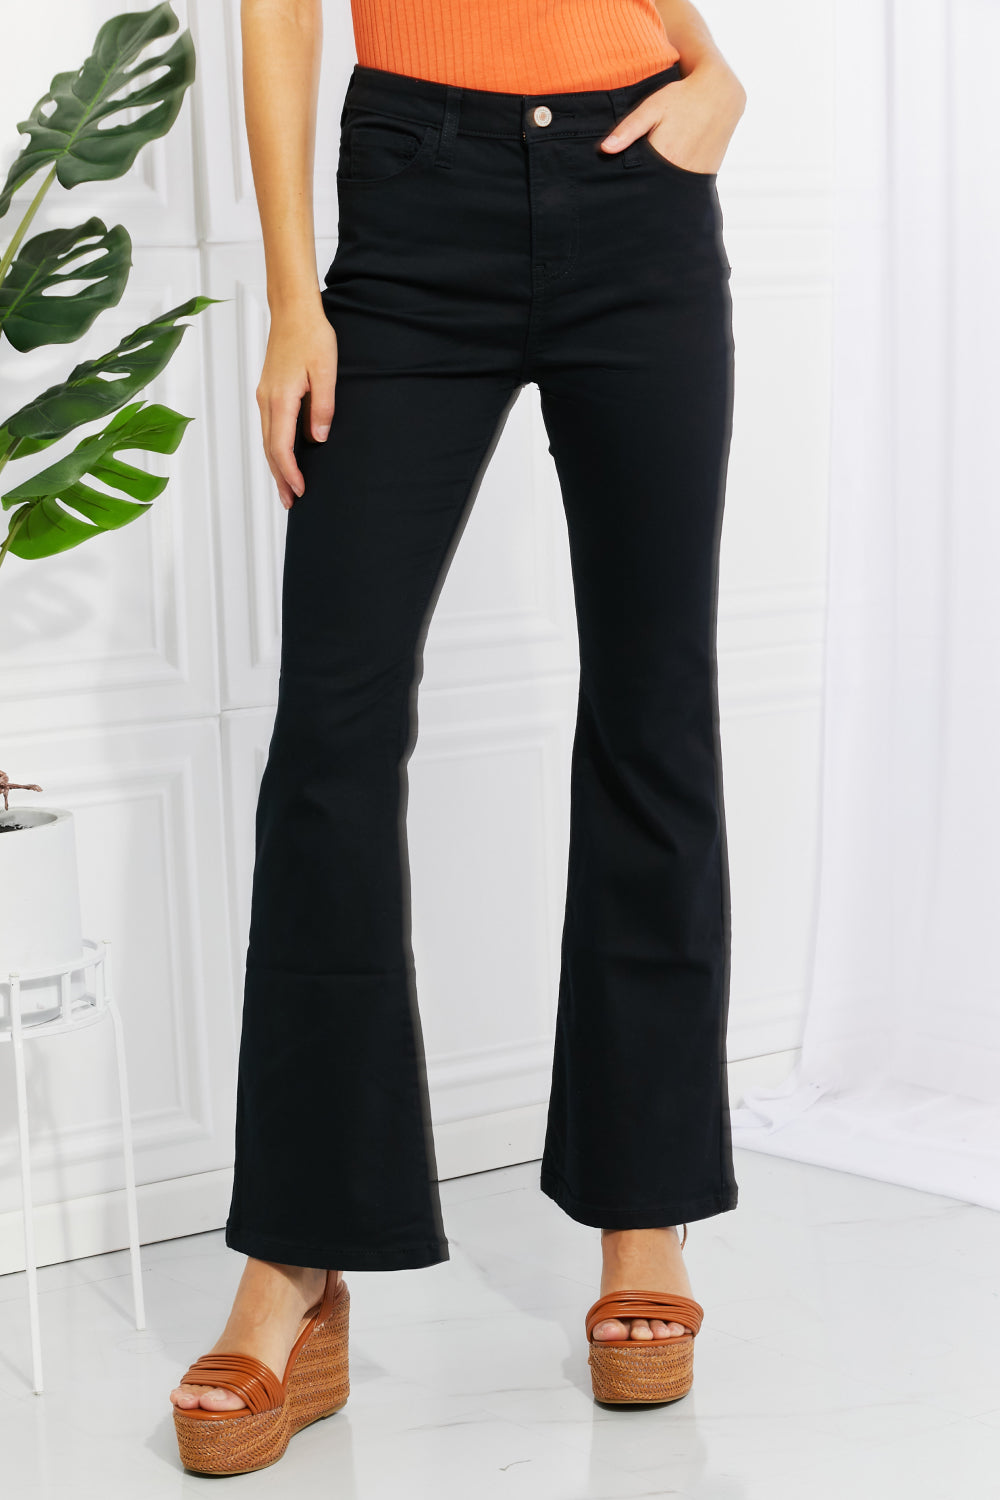 Zenana Clementine Full Size High-Rise Bootcut Jeans in Black ALSO IN PLUS SIZES